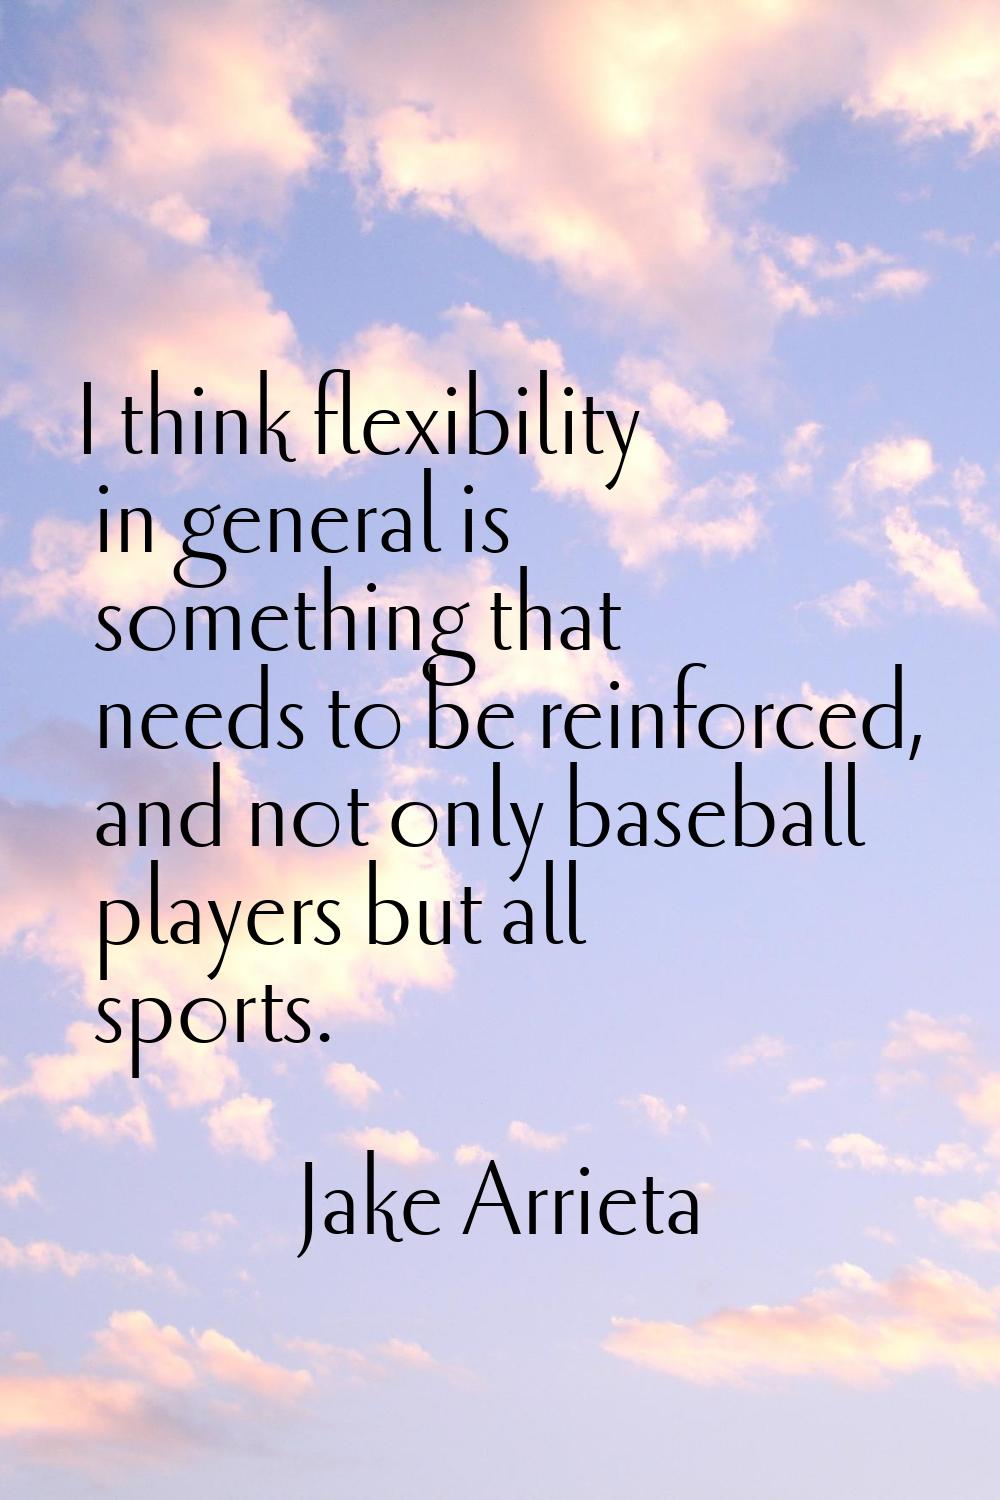 I think flexibility in general is something that needs to be reinforced, and not only baseball play